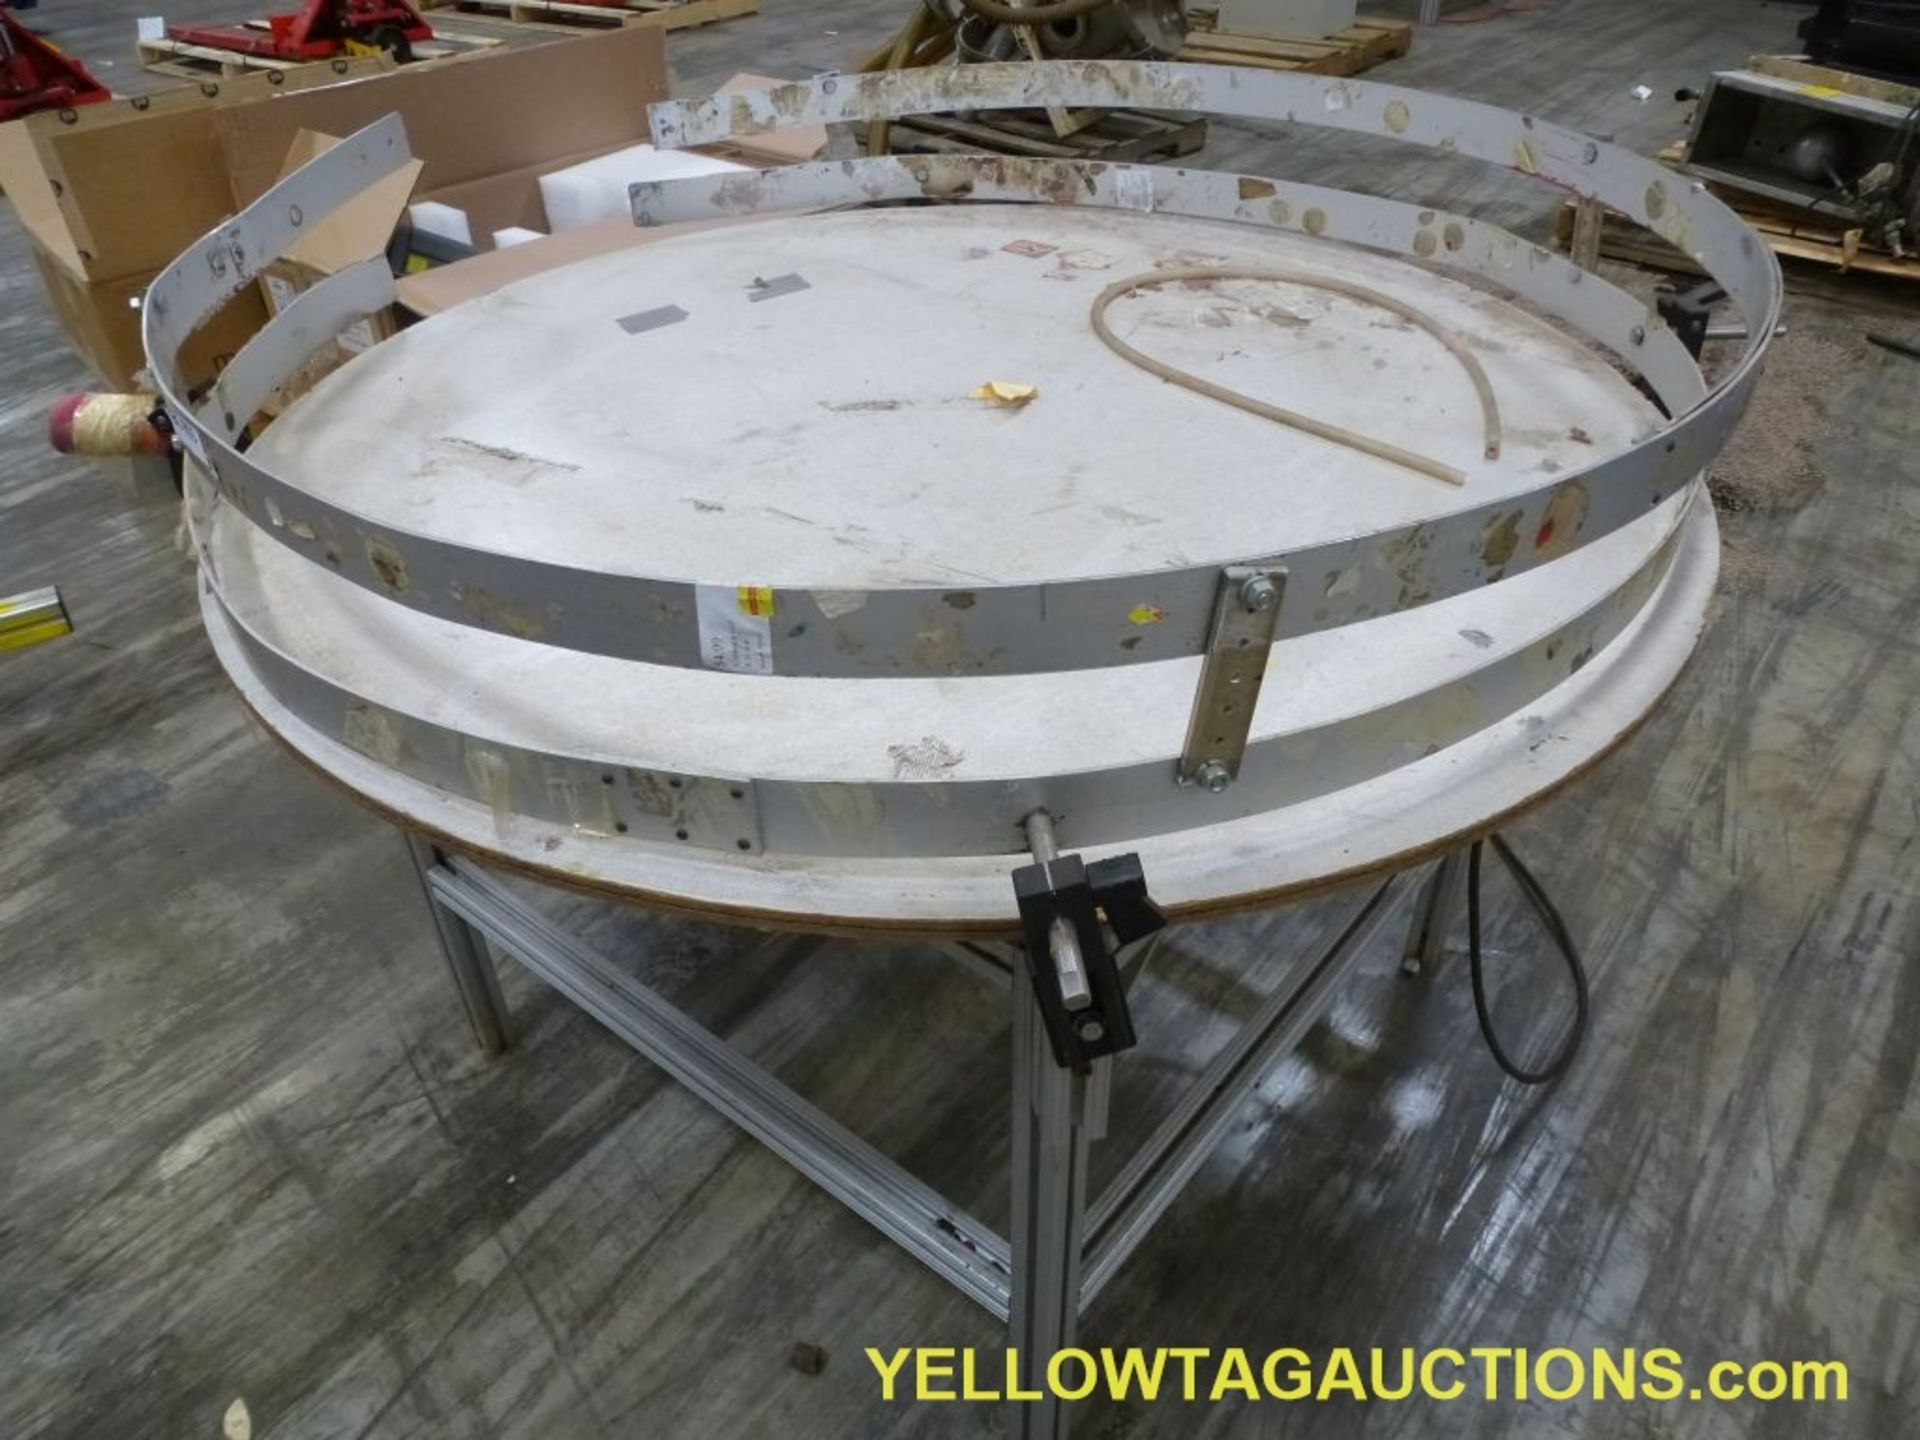 48" Rotary Table|Lot Loading Fee: $5.00 - Image 3 of 3